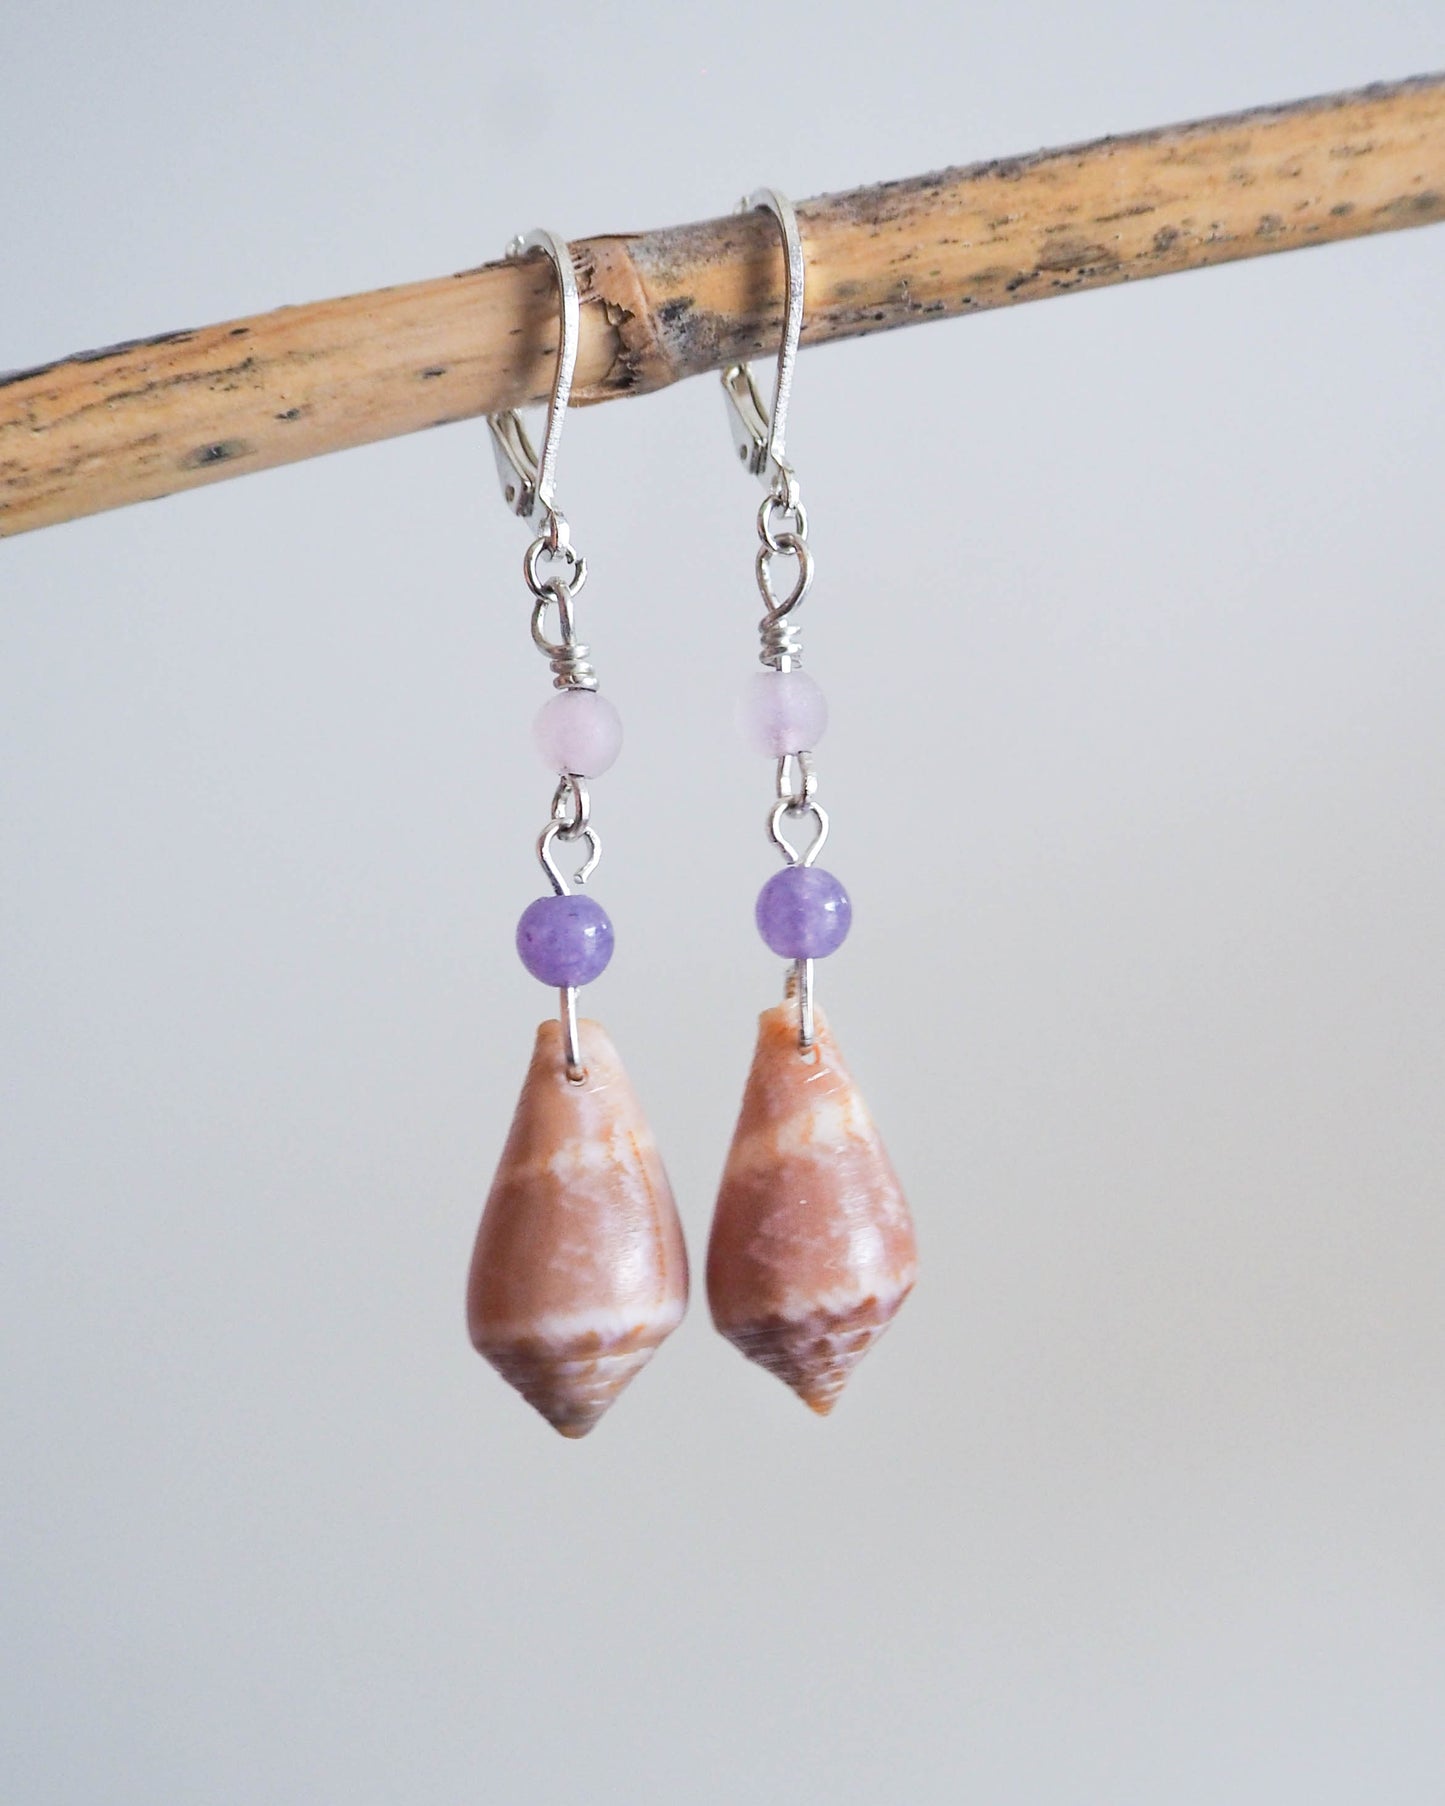 Boho Beach Style - Cone Shell Earrings with Natural Gemstones